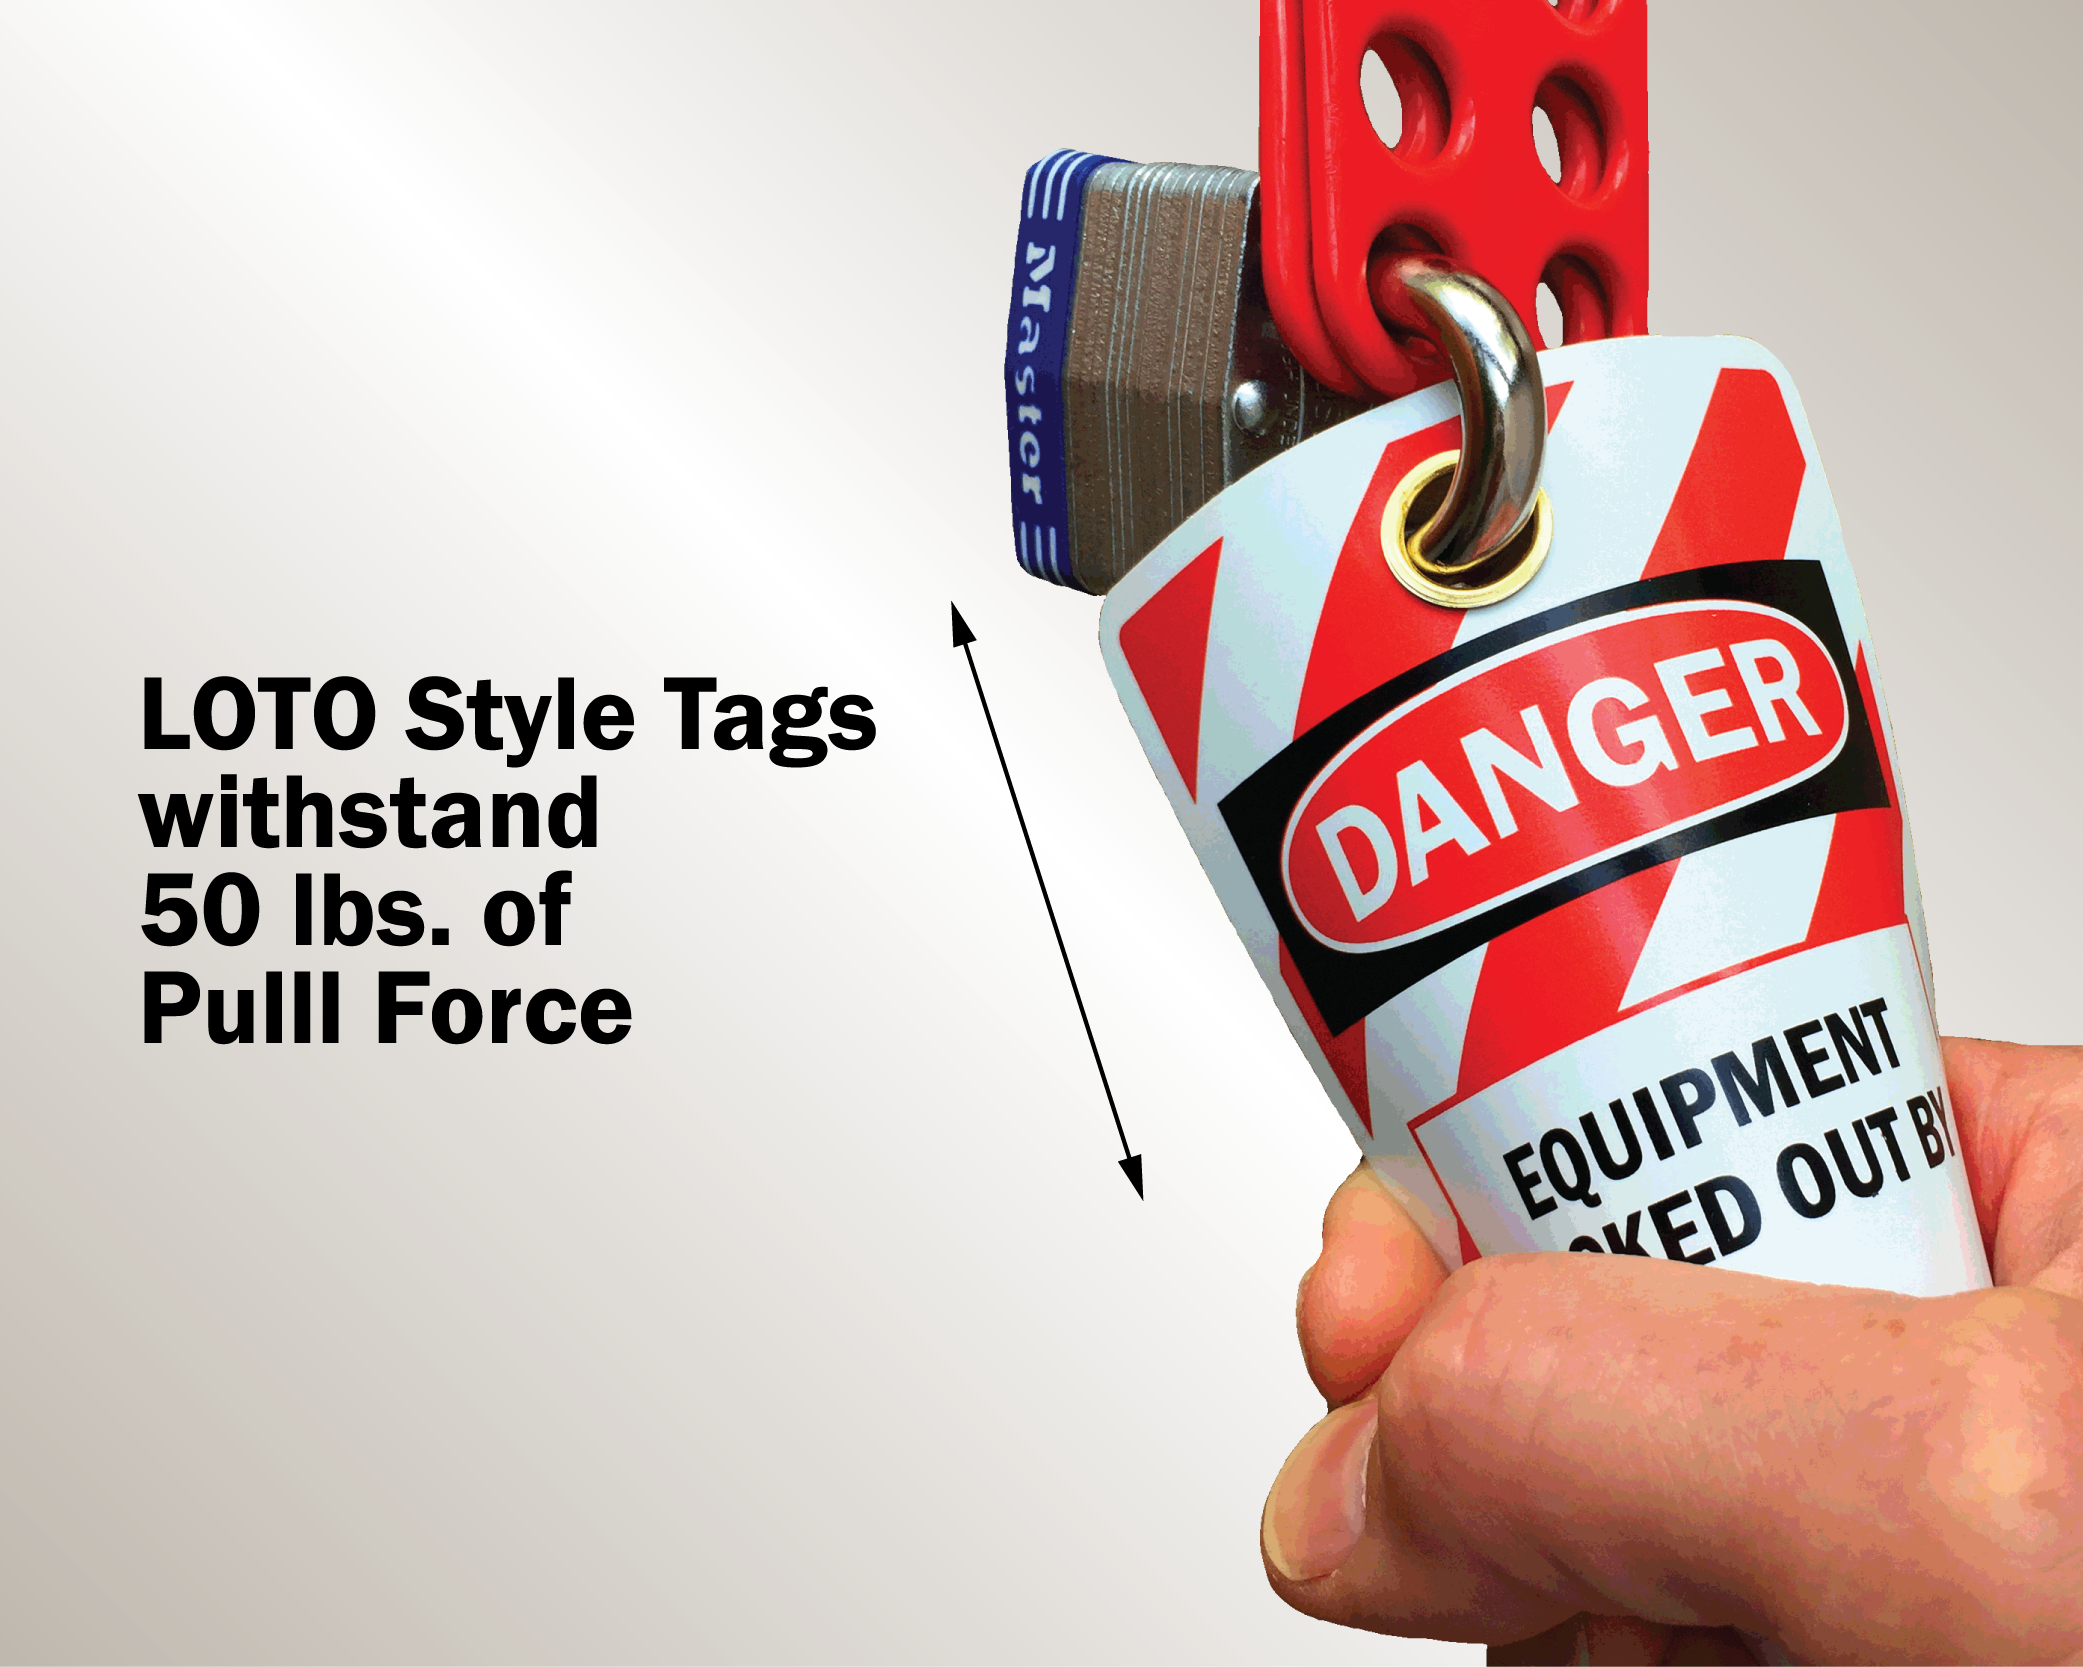 An image of an OSHA style lockout tagout tag with black text on a red and white striped background attached to a red hasp with a padlock as a hand pulls the tag to demonstrate that the tag withstands 50 lbs of pull force.